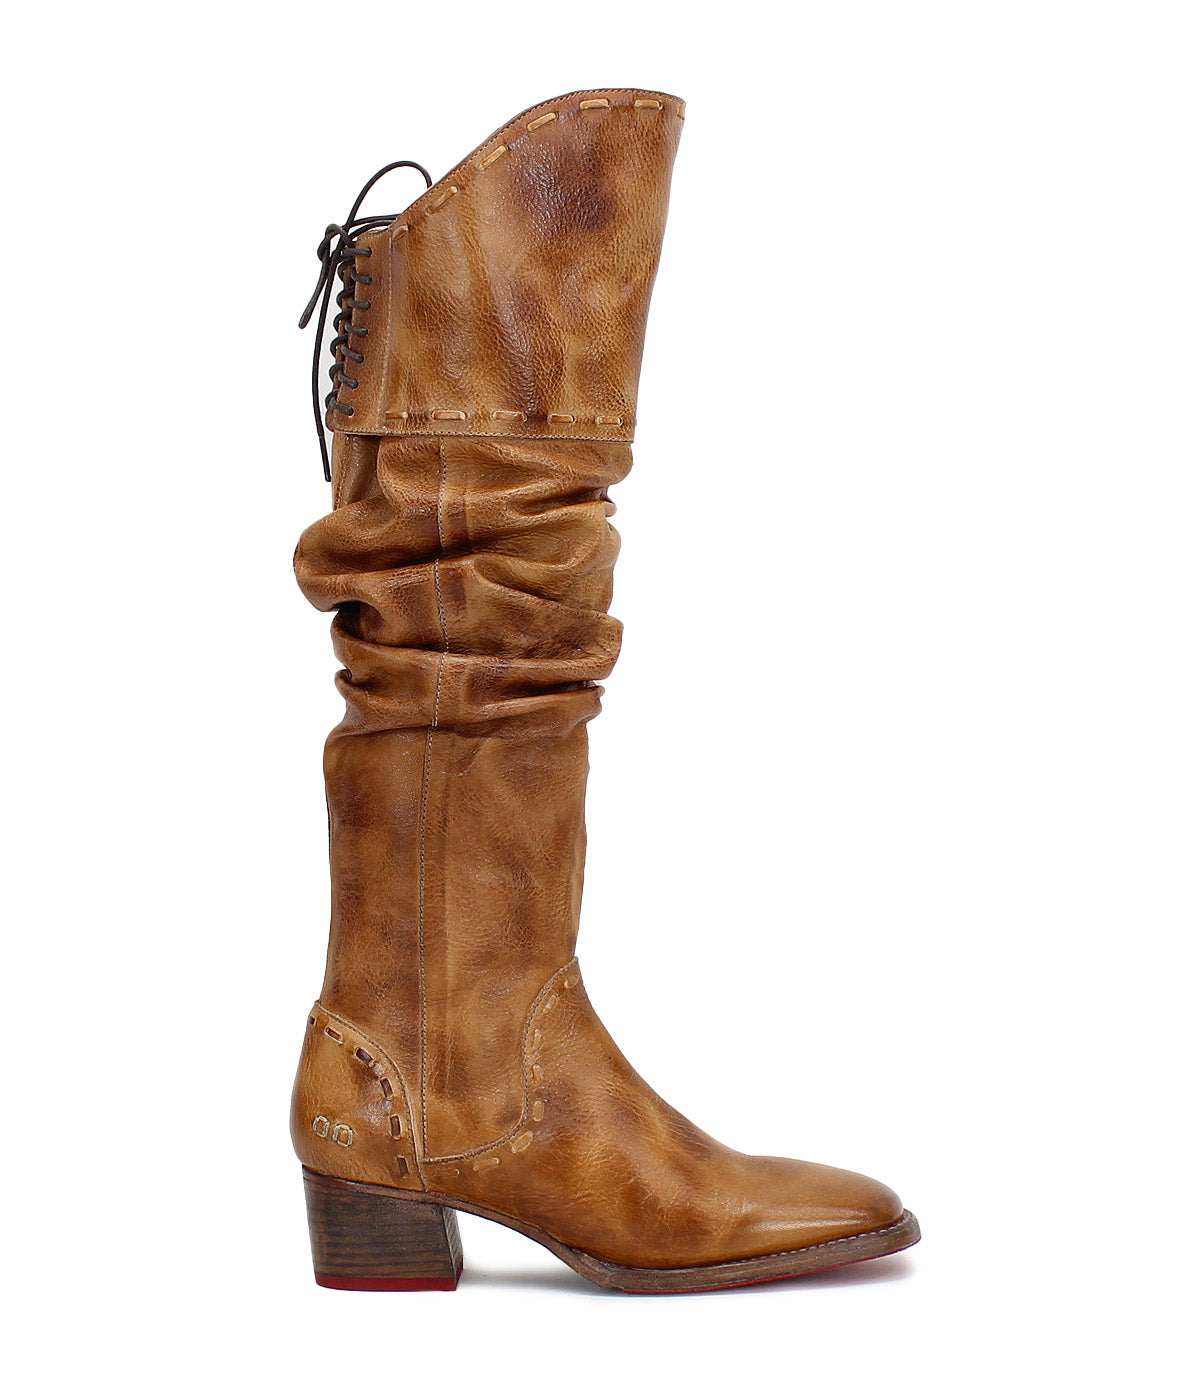 A Leilani women's tan leather over the knee boot by Bed Stu.